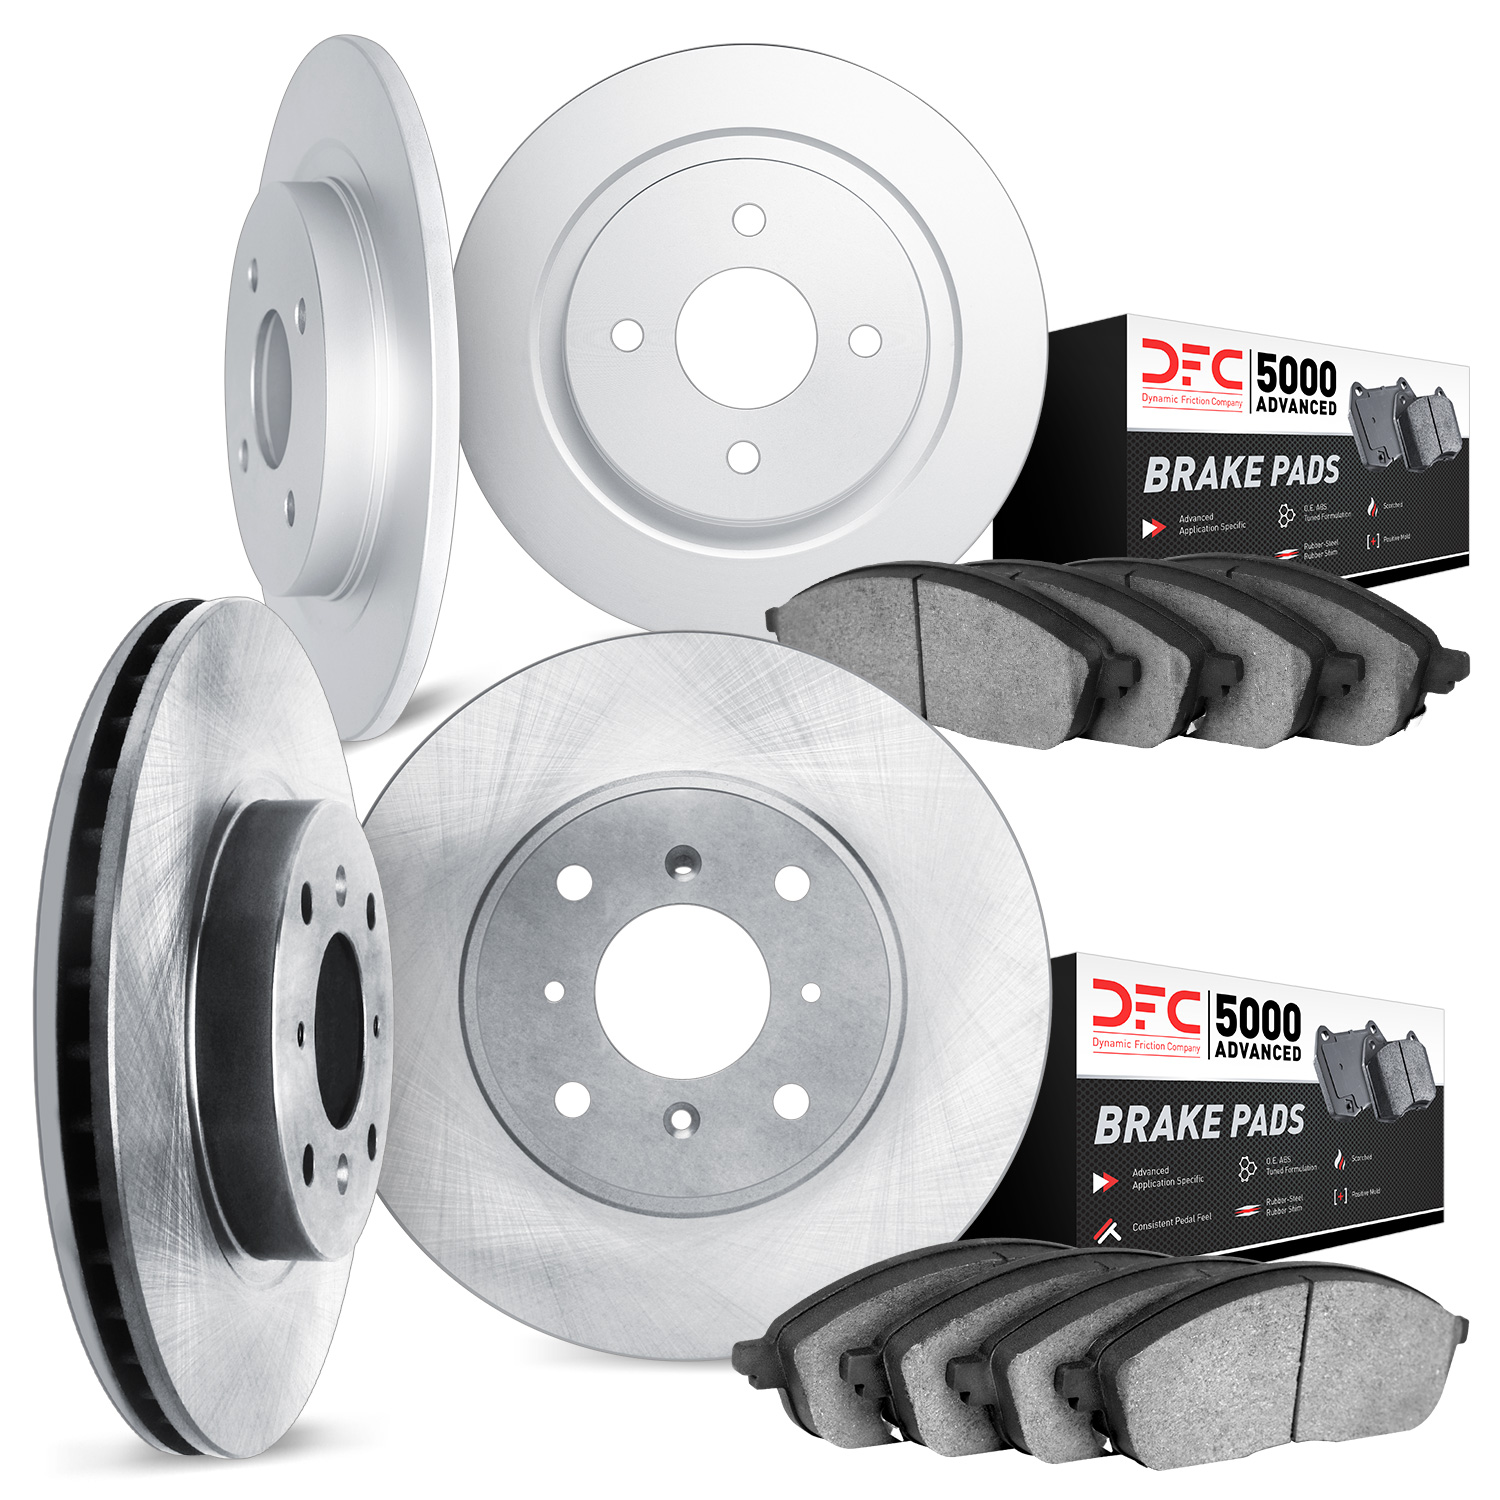 6504-54992 Brake Rotors w/5000 Advanced Brake Pads Kit, 1992-1995 Ford/Lincoln/Mercury/Mazda, Position: Front and Rear